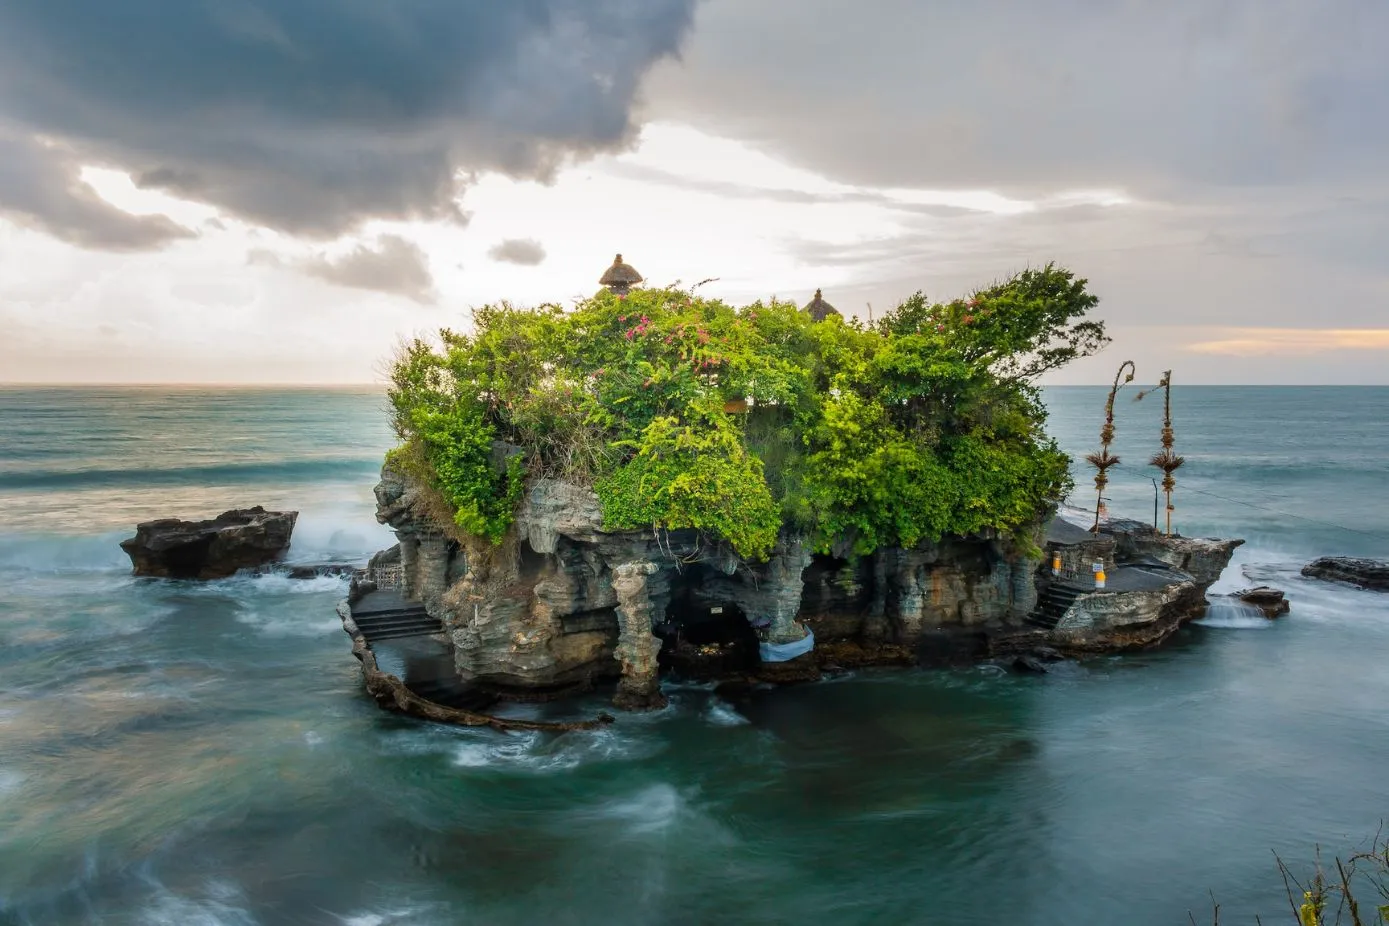 13 Best Things To Do In Bali - Tanah Lot Temple